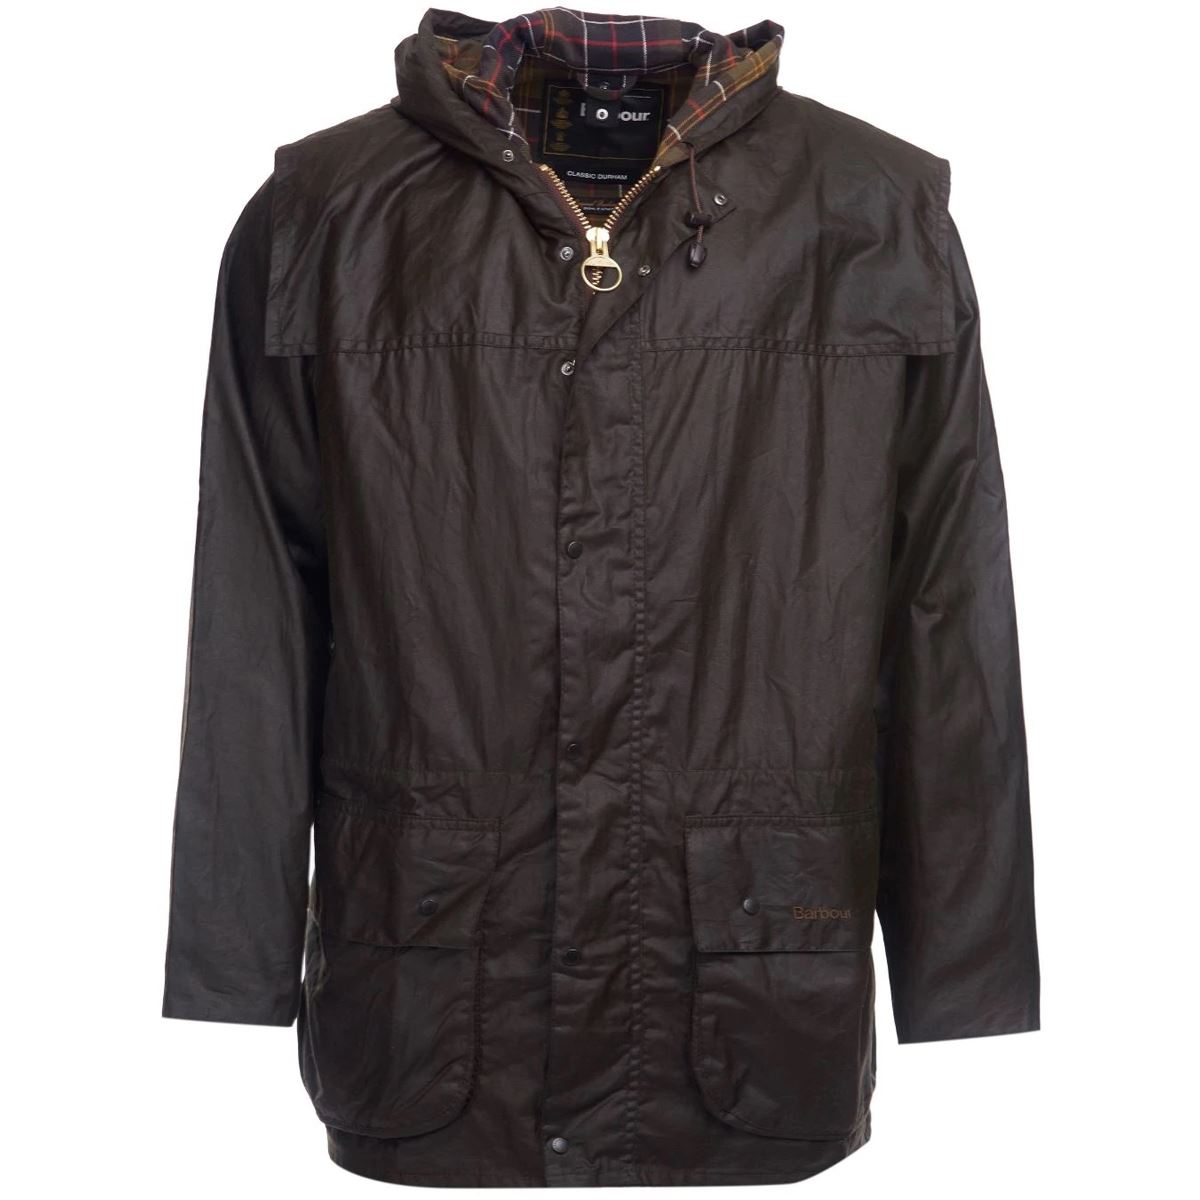 What are the features of the Barbour Durham Jacket?